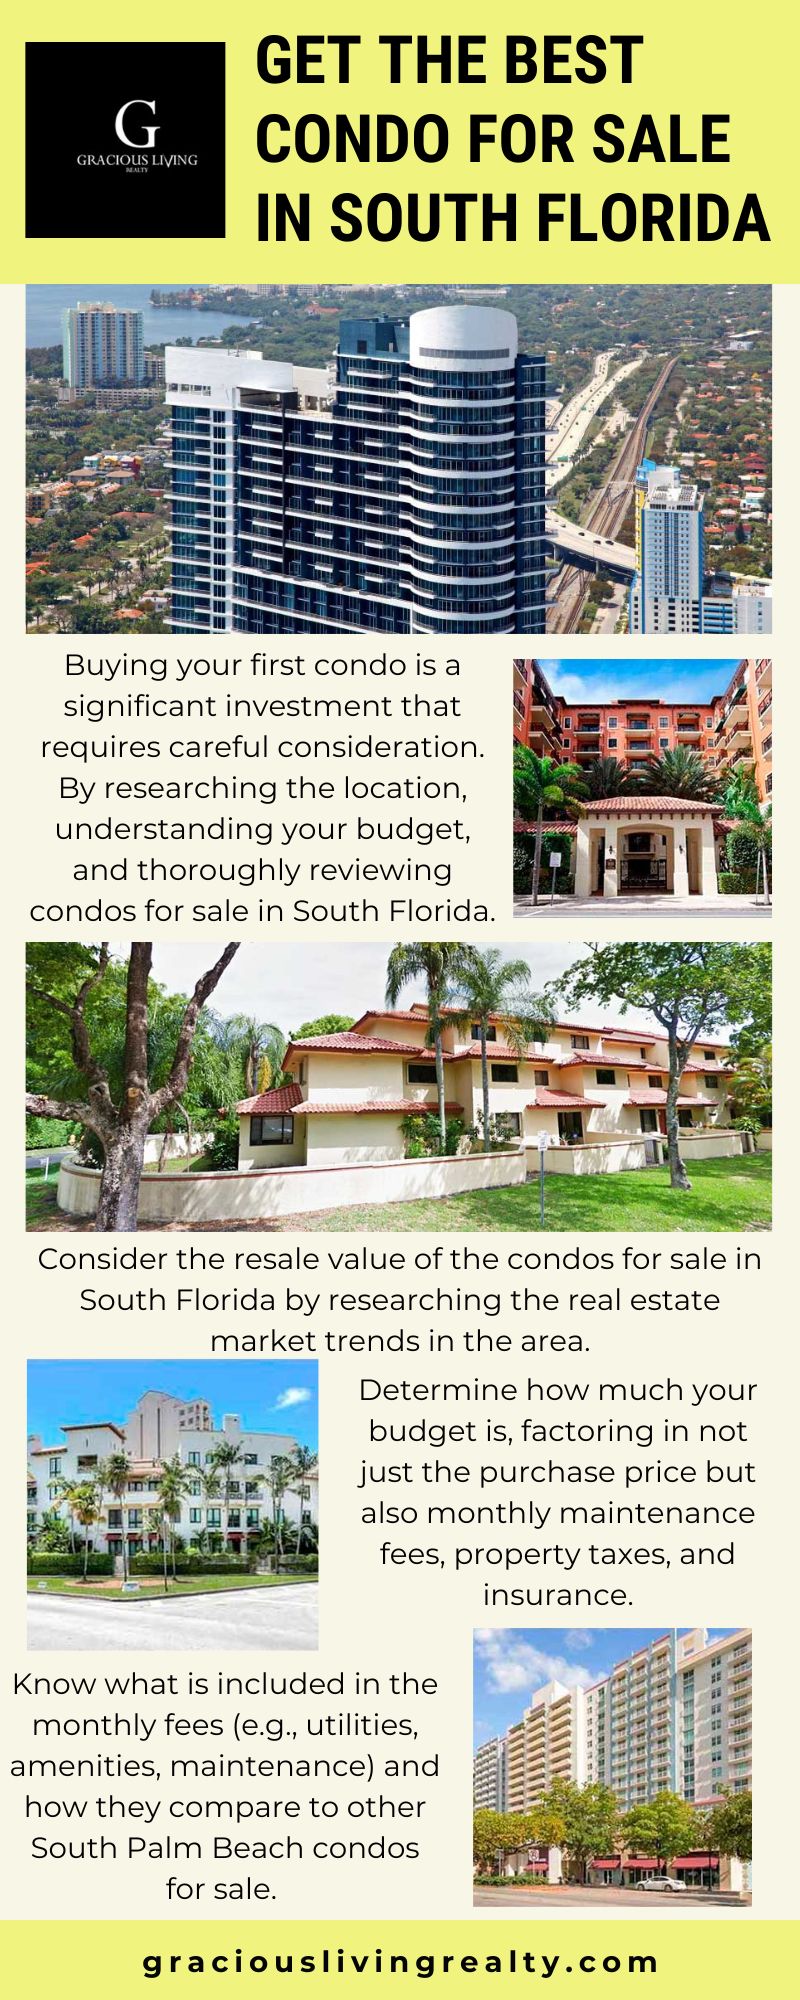 Get The Best Condo For Sale in South Florida